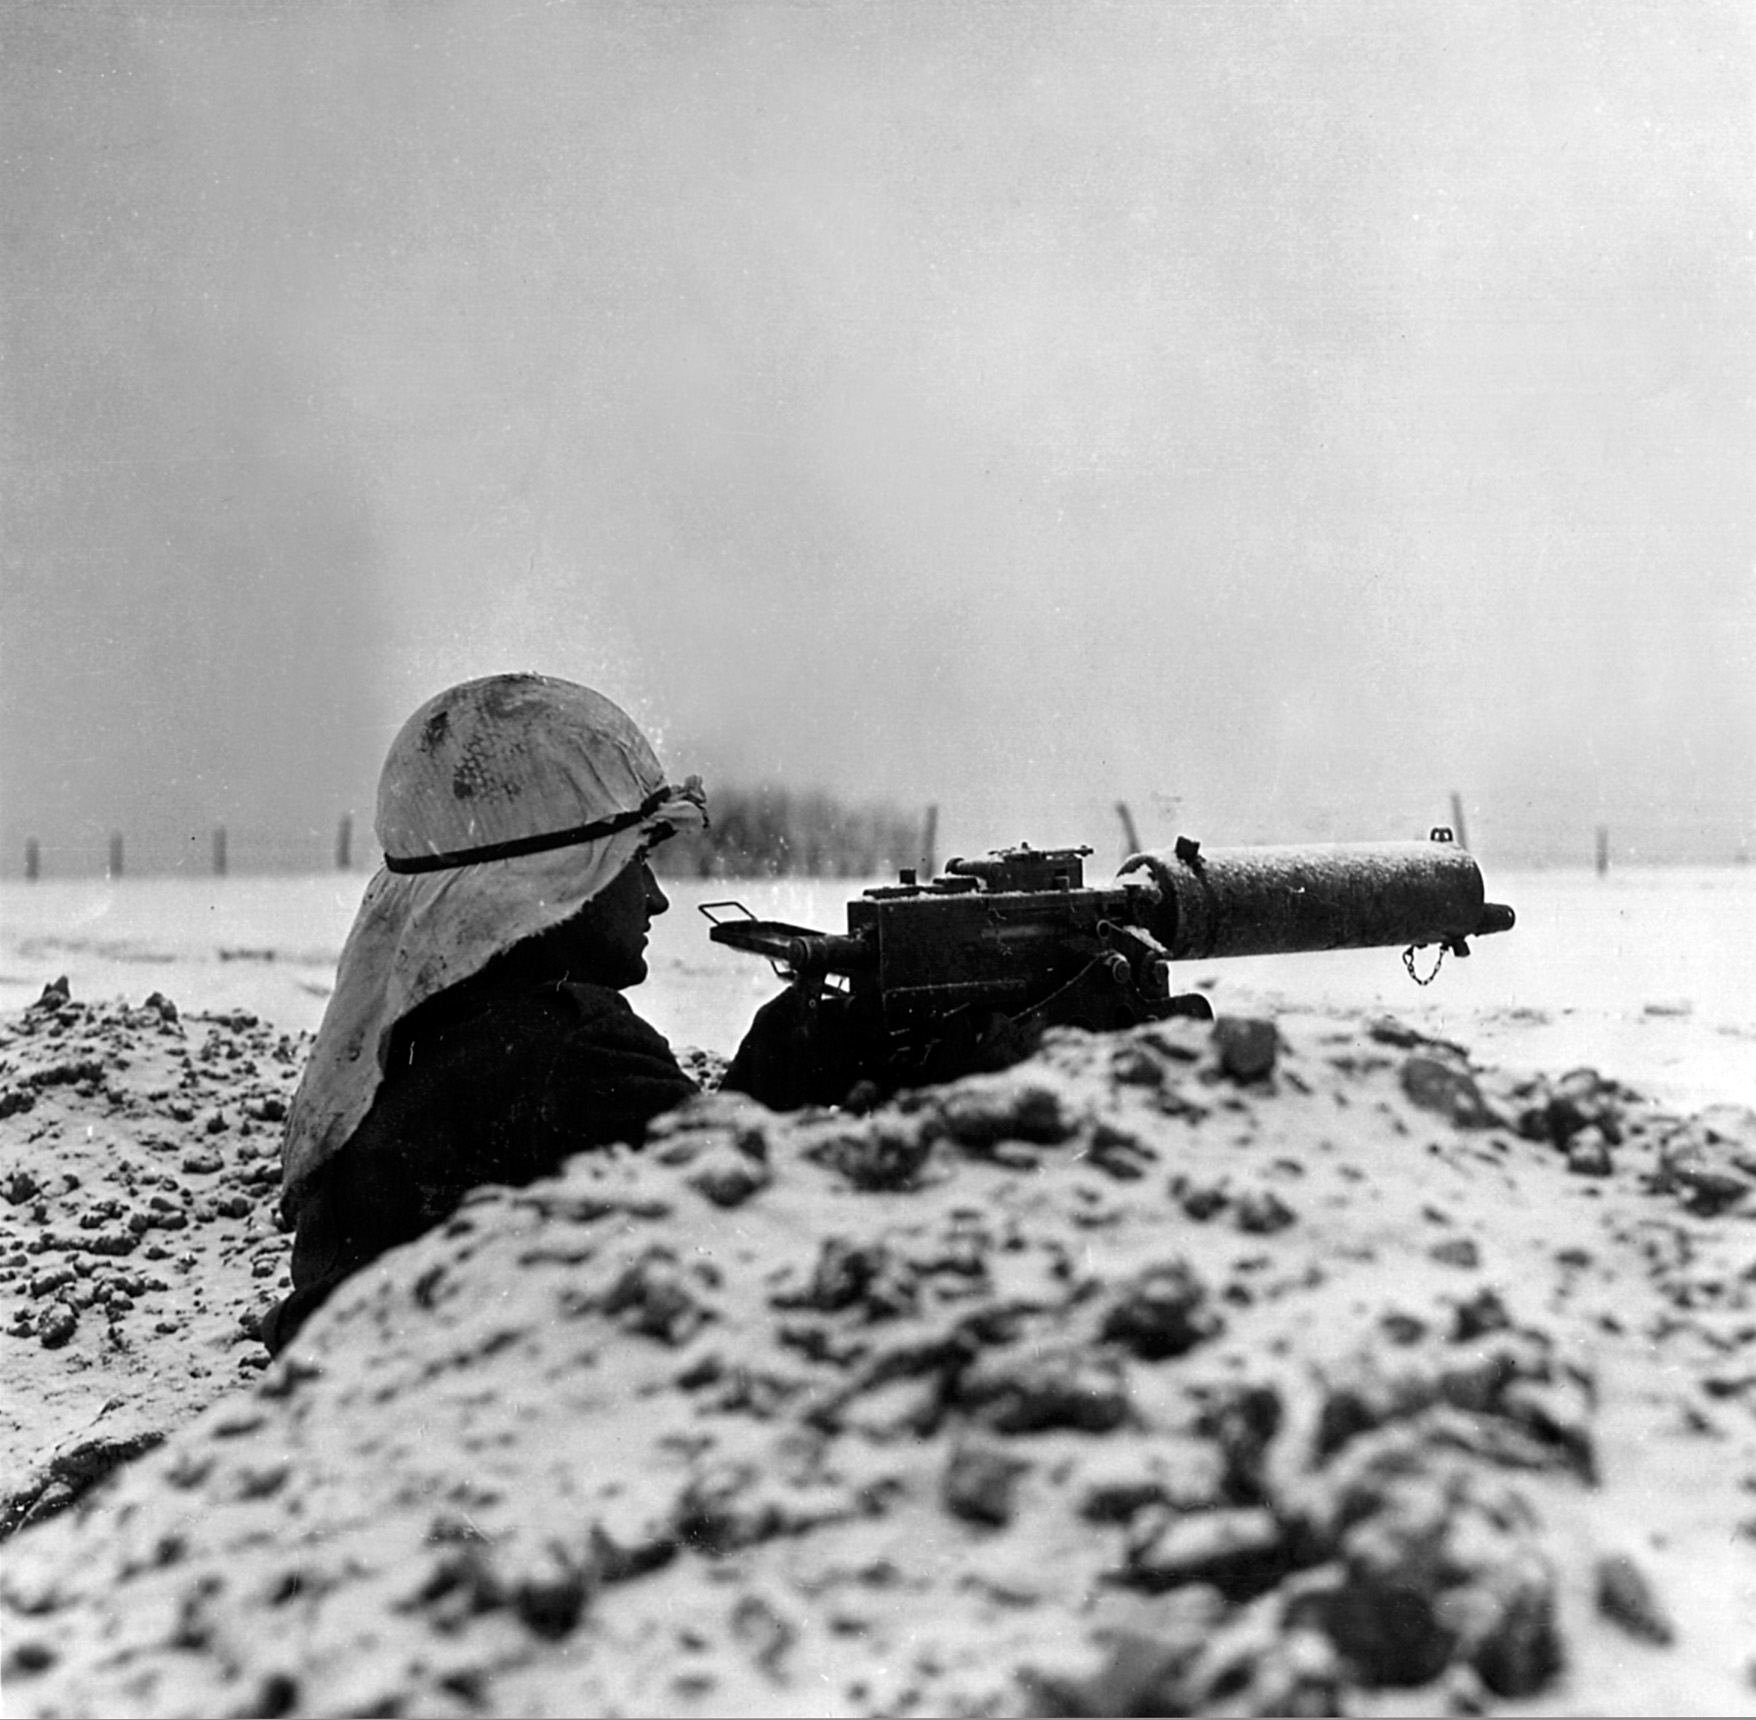 Scanning the horizon down the barrel of his .30-caliber machine gun, this soldier from the 30th Infantry Division watches for signs of enemy movement.